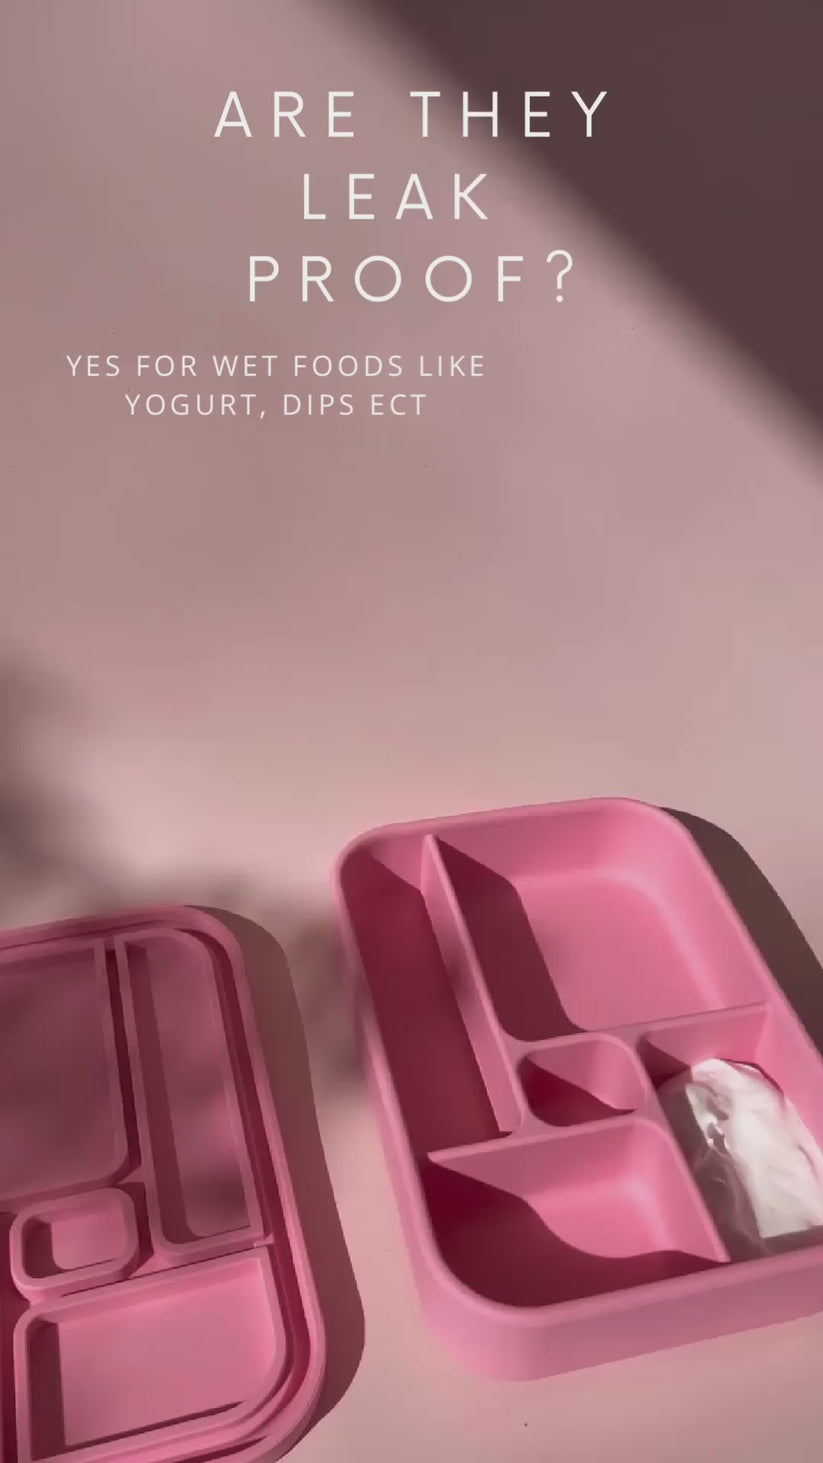 Video showing leak proof Bento Lunchboxes from The Zero Waste People